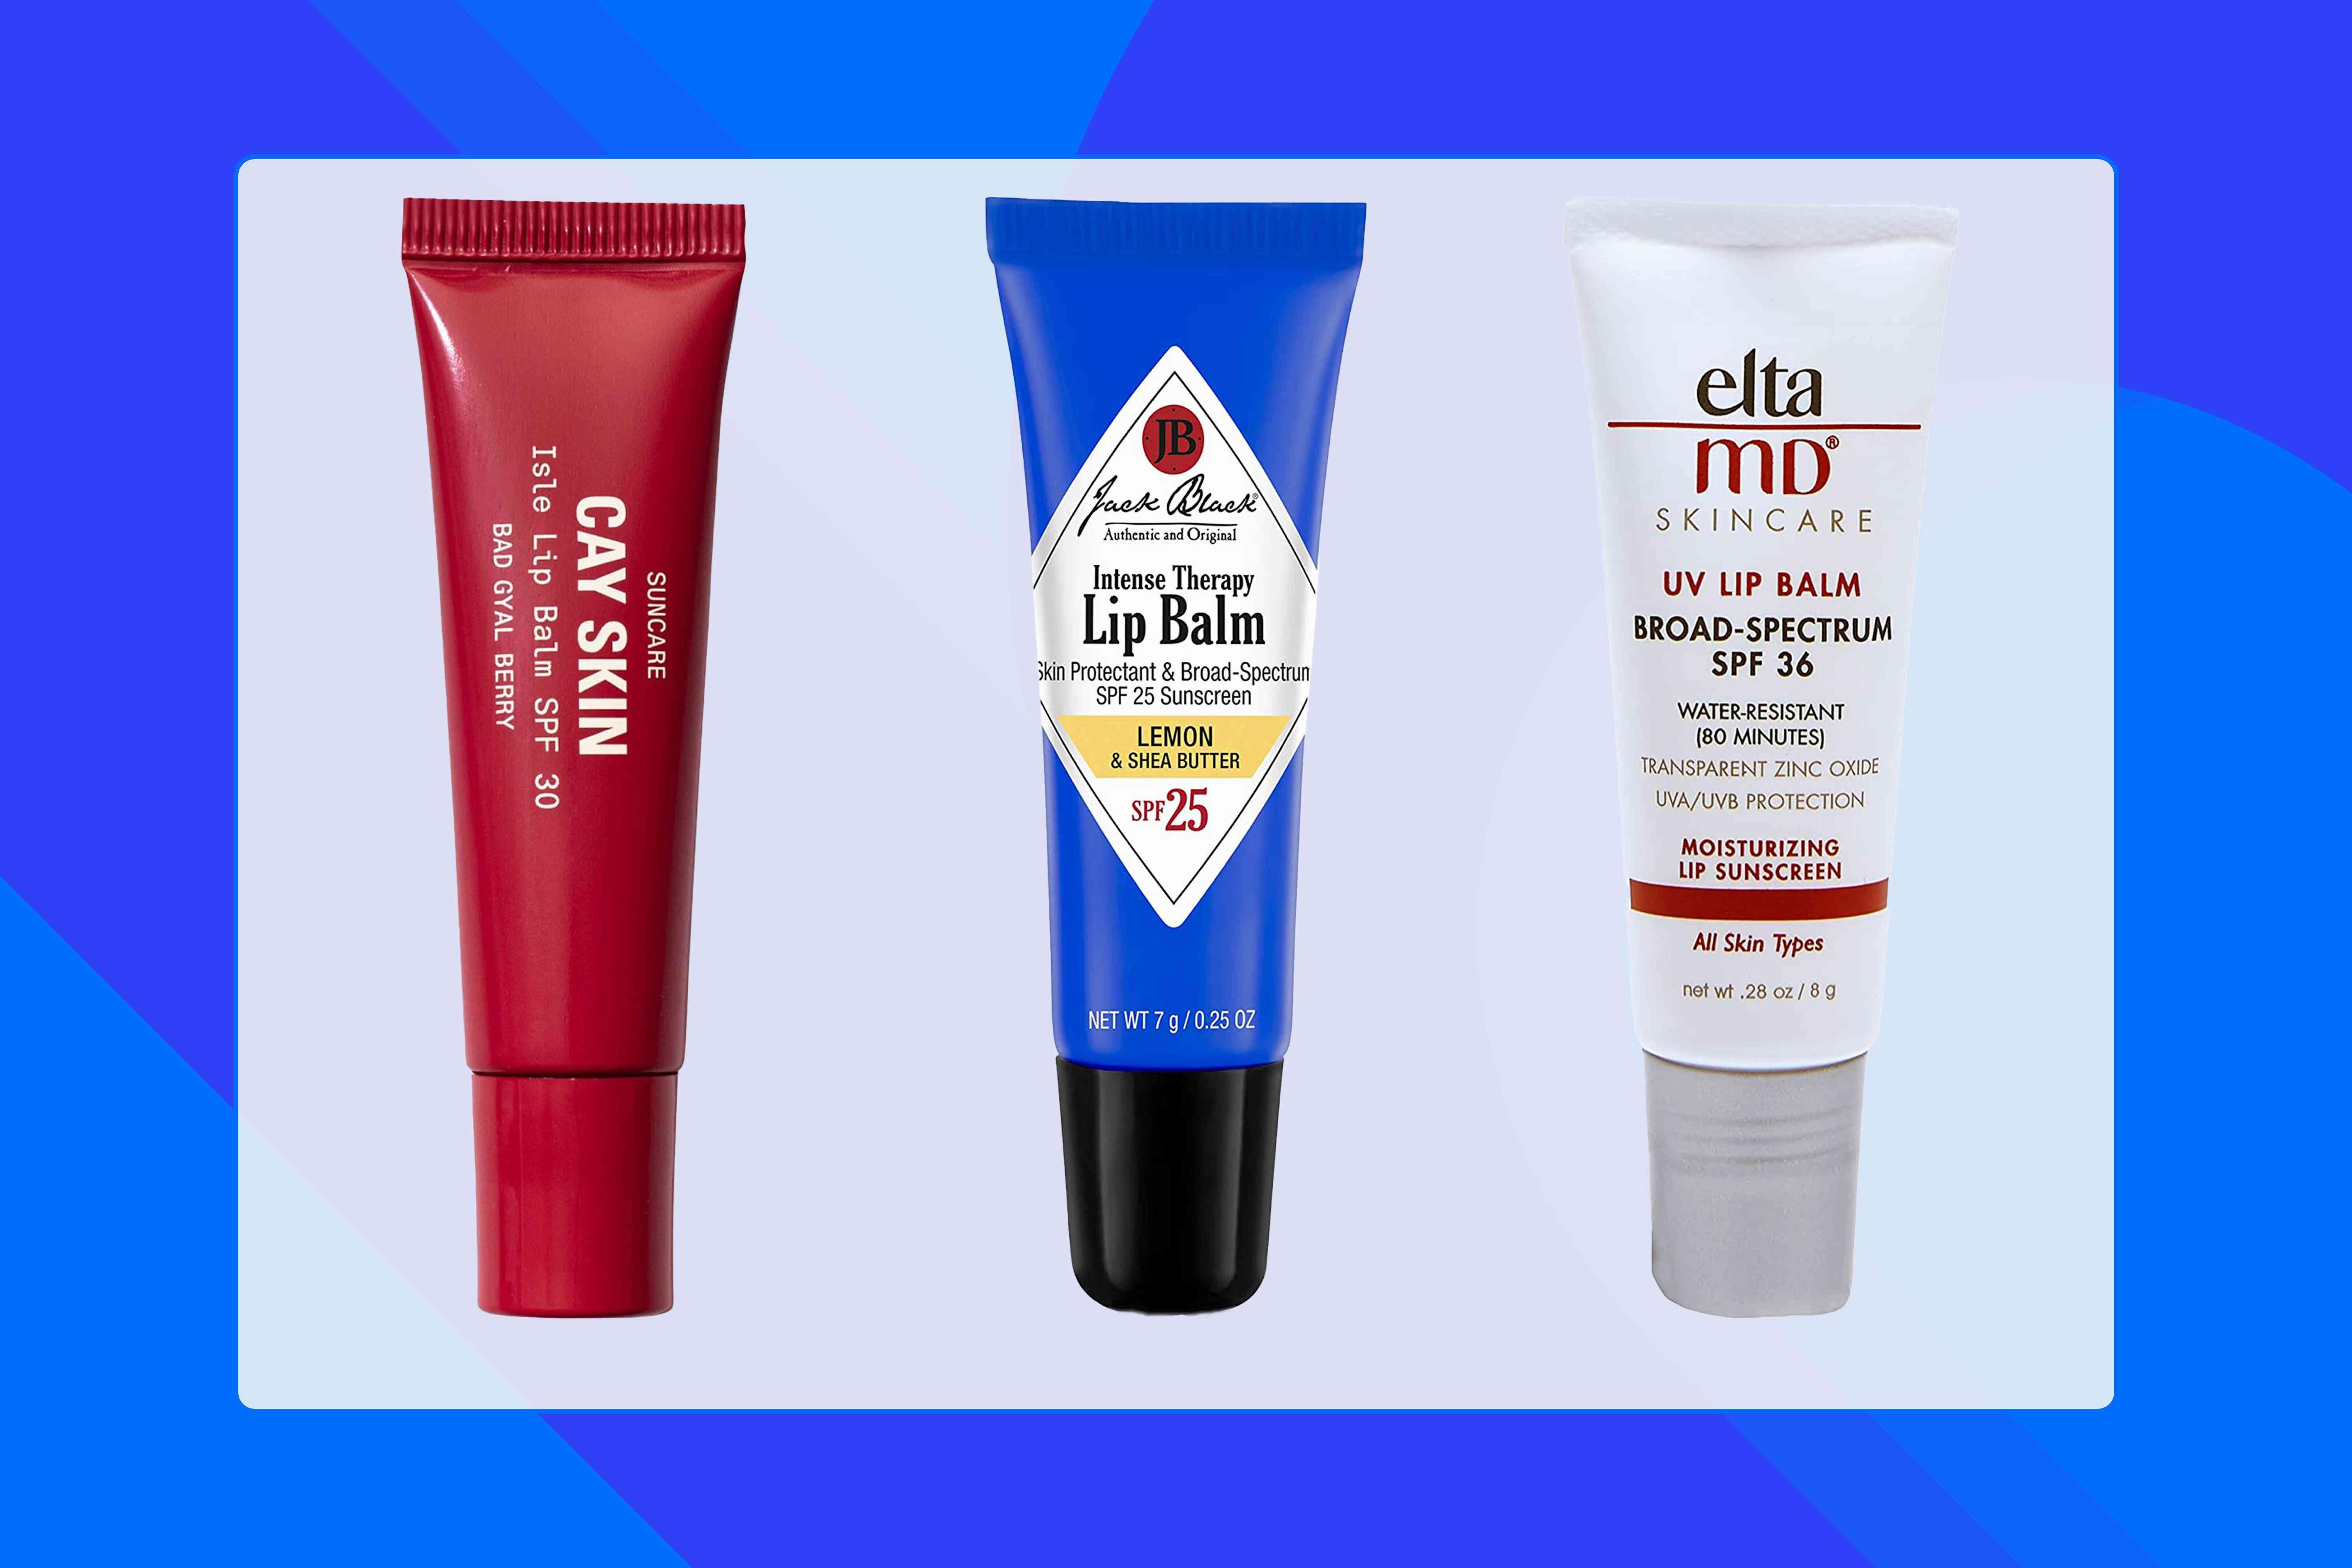 The image shows three lip balms with SPF: Sun Bums Cay Skin Bad Gyal Berry SPF 30, Jack Blacks Intense Therapy Lip Balm SPF 25, and EltaMDs UV Lip Balm SPF 36.